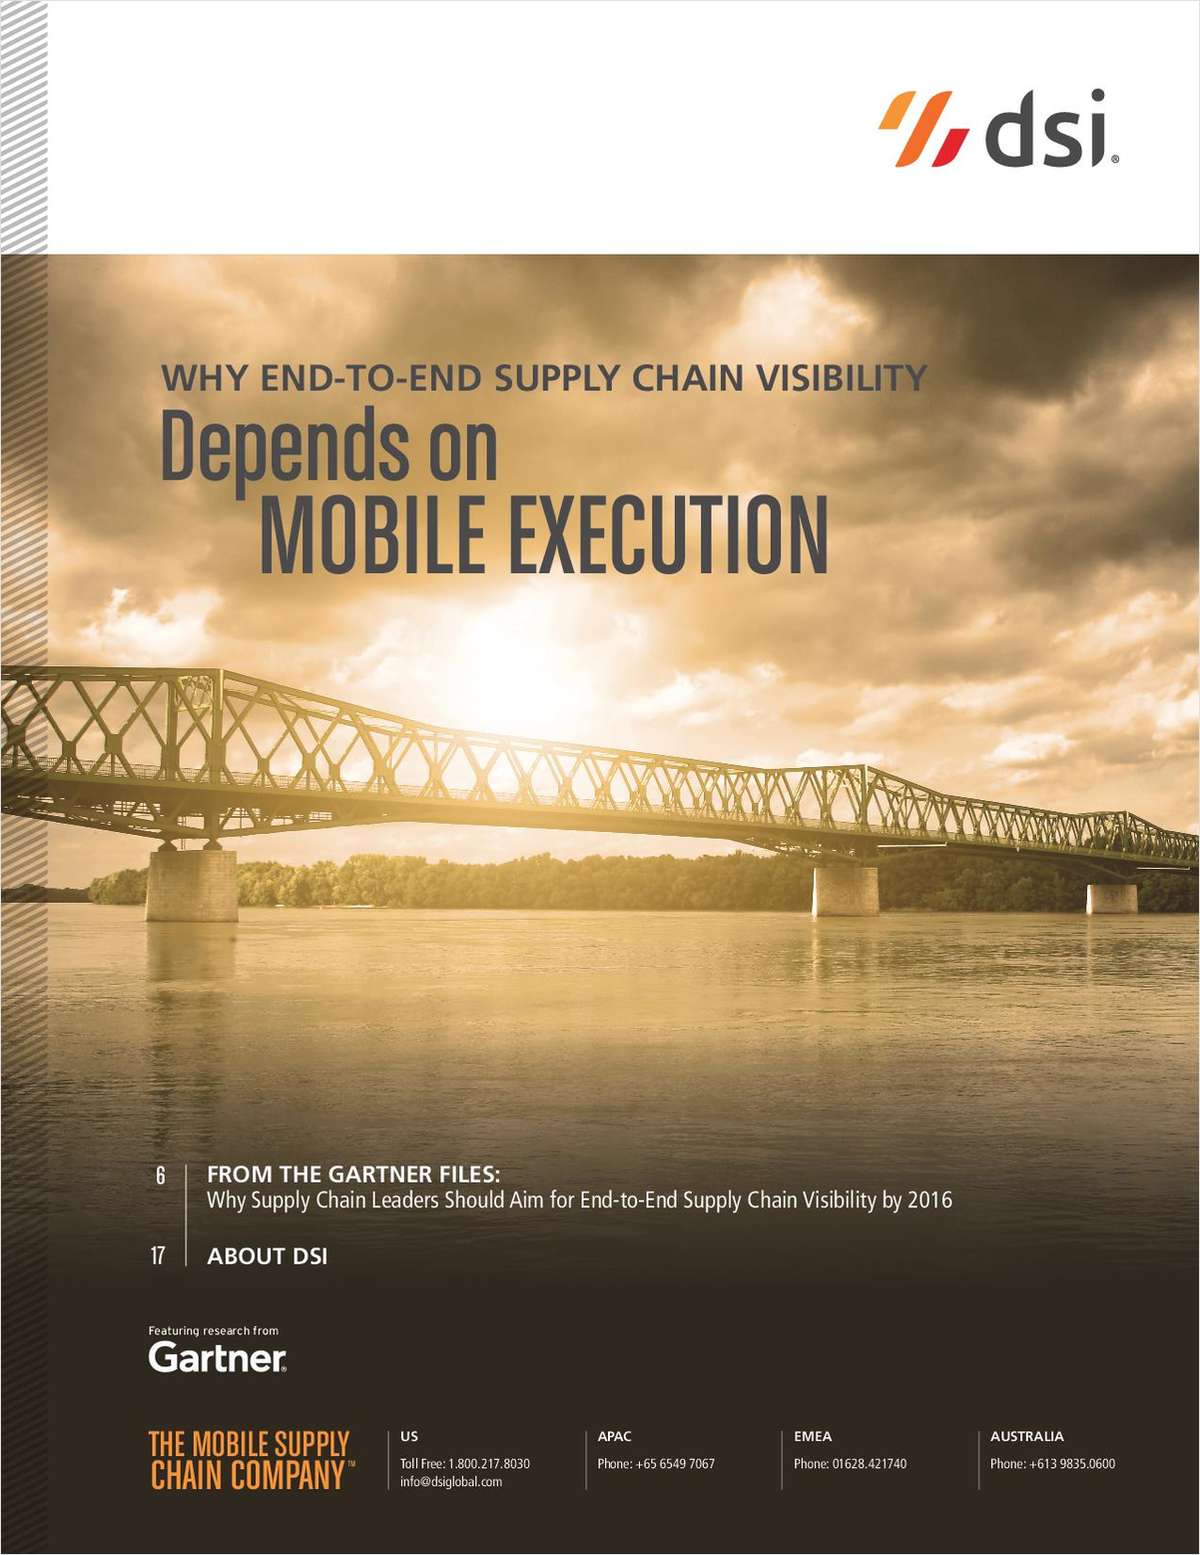 Why End-to-End Supply Chain Visibility Depends on Mobile Execution